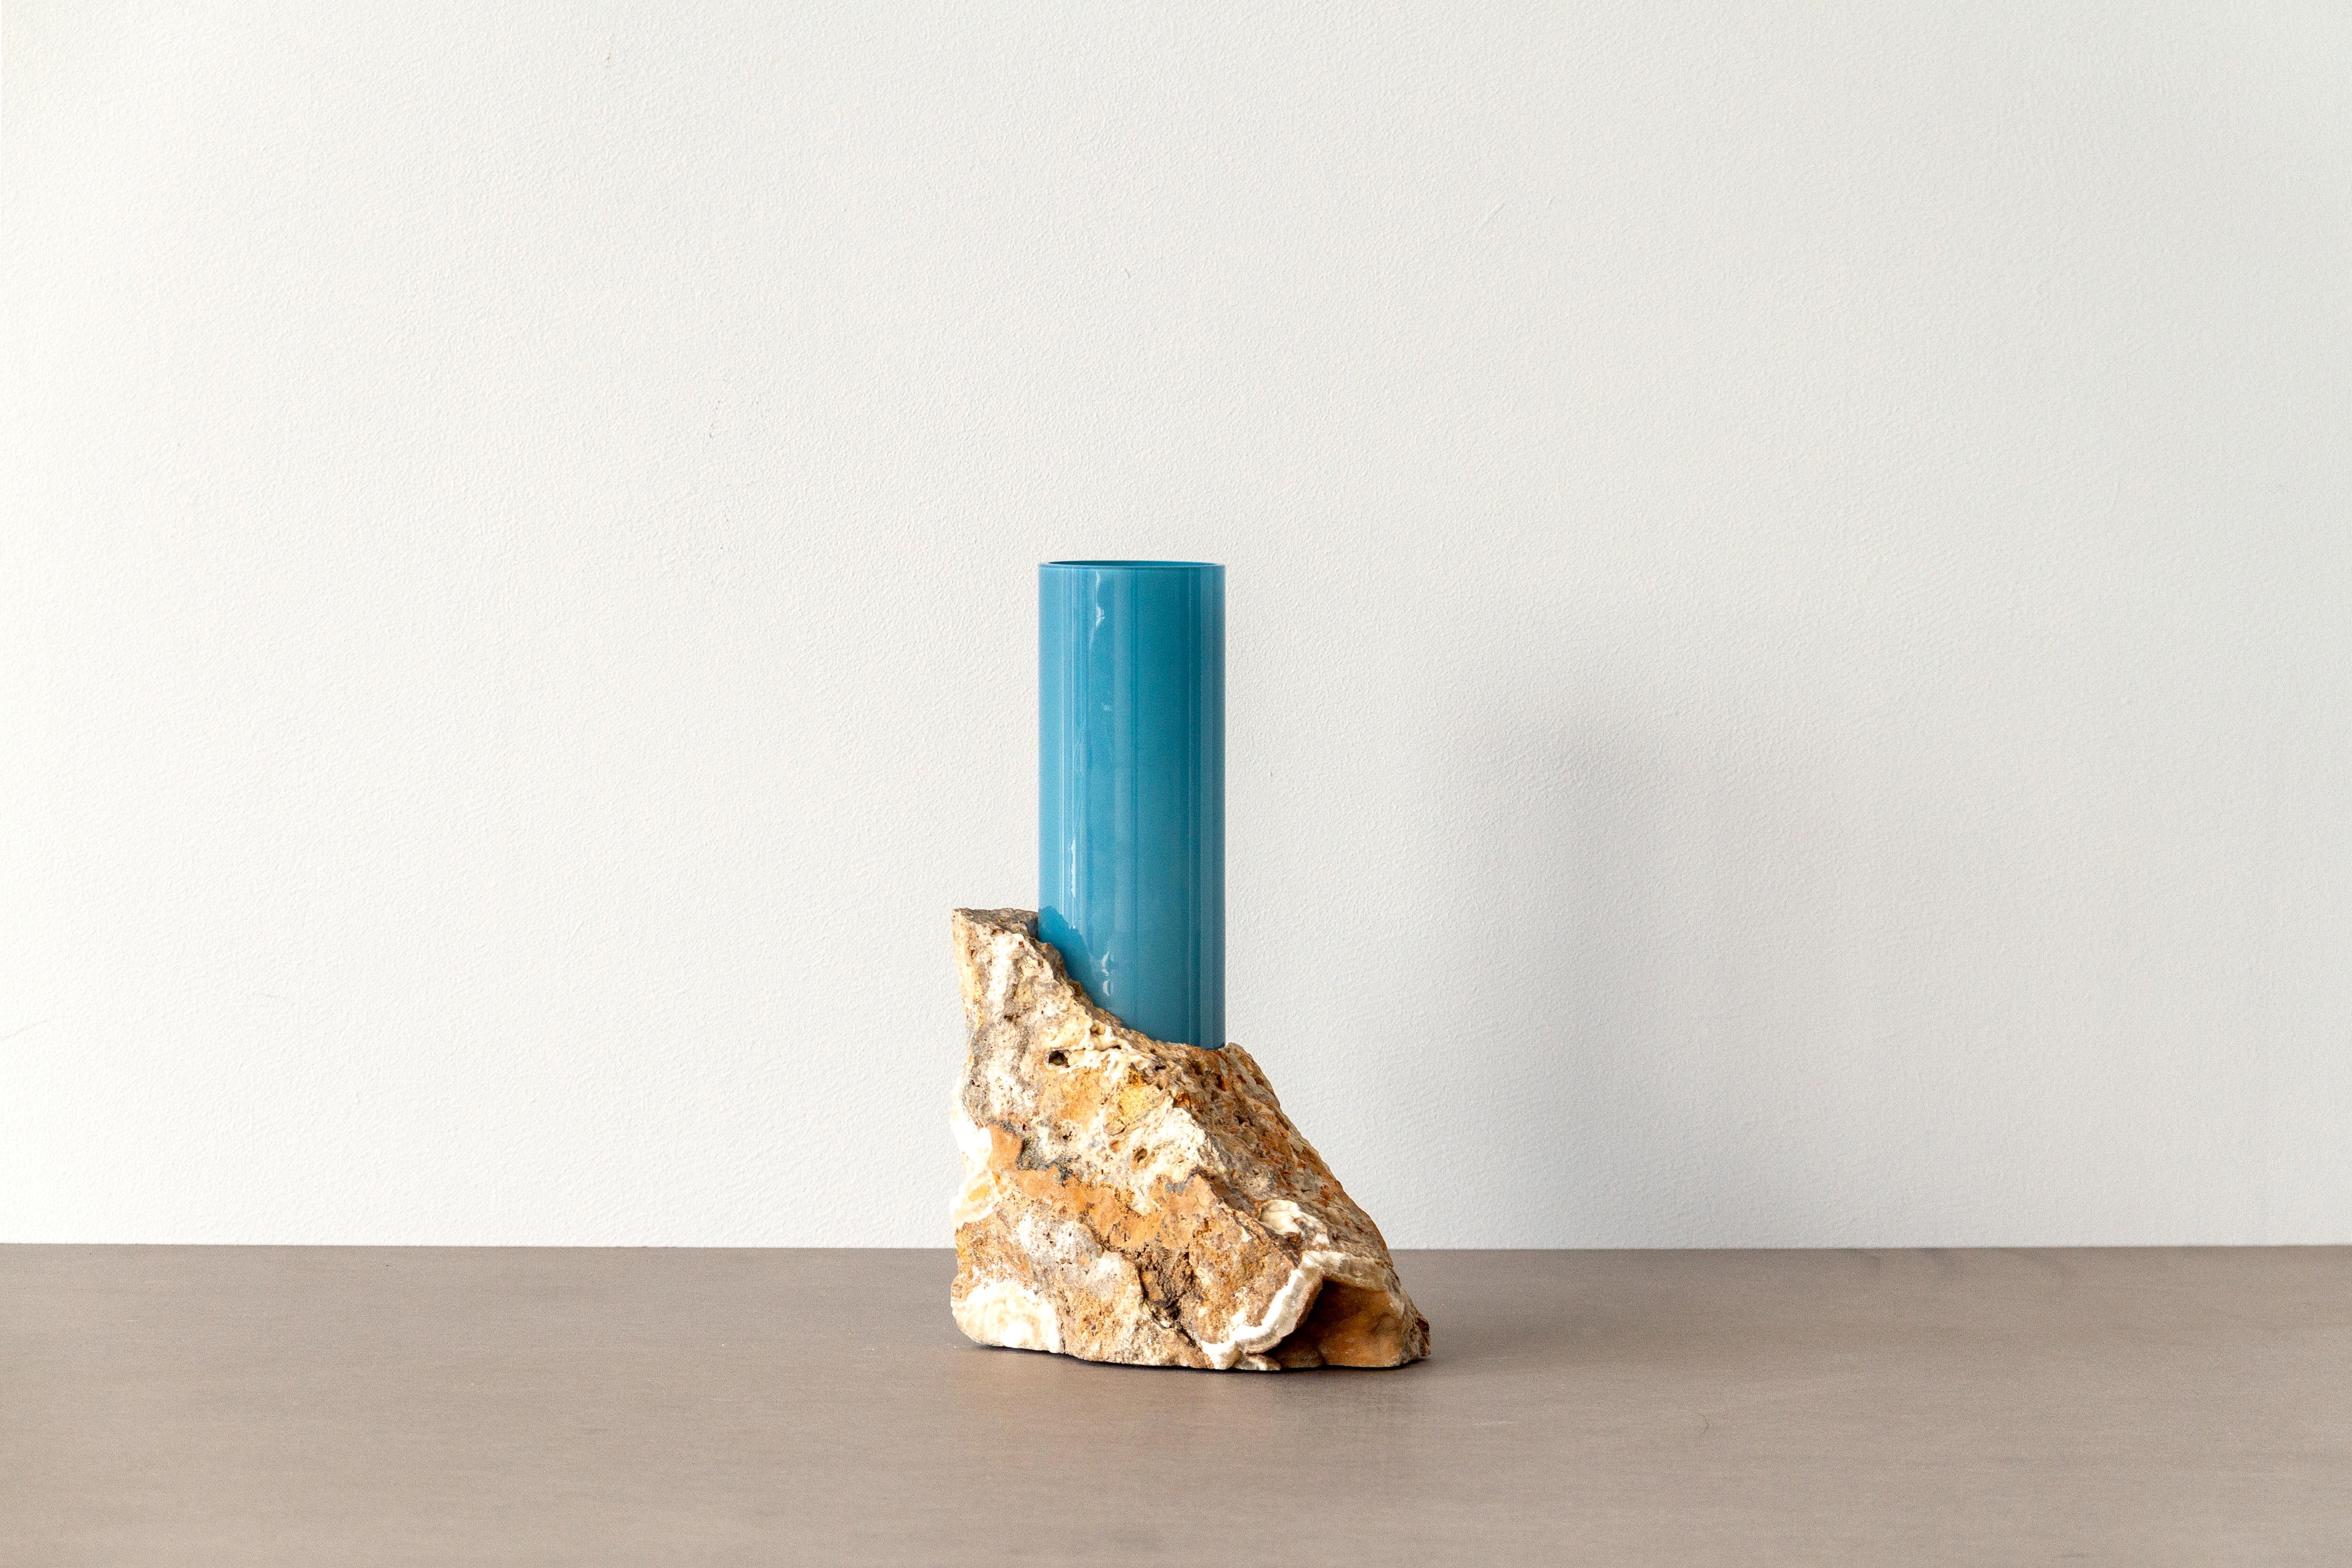 Drill vases

Part chaos and part control, drill vases are an exercise in
improvisation.  

The origin of the project lies in Carrara, and the small fragments of
marble found discarded by quarries in the region. I began to collect
these